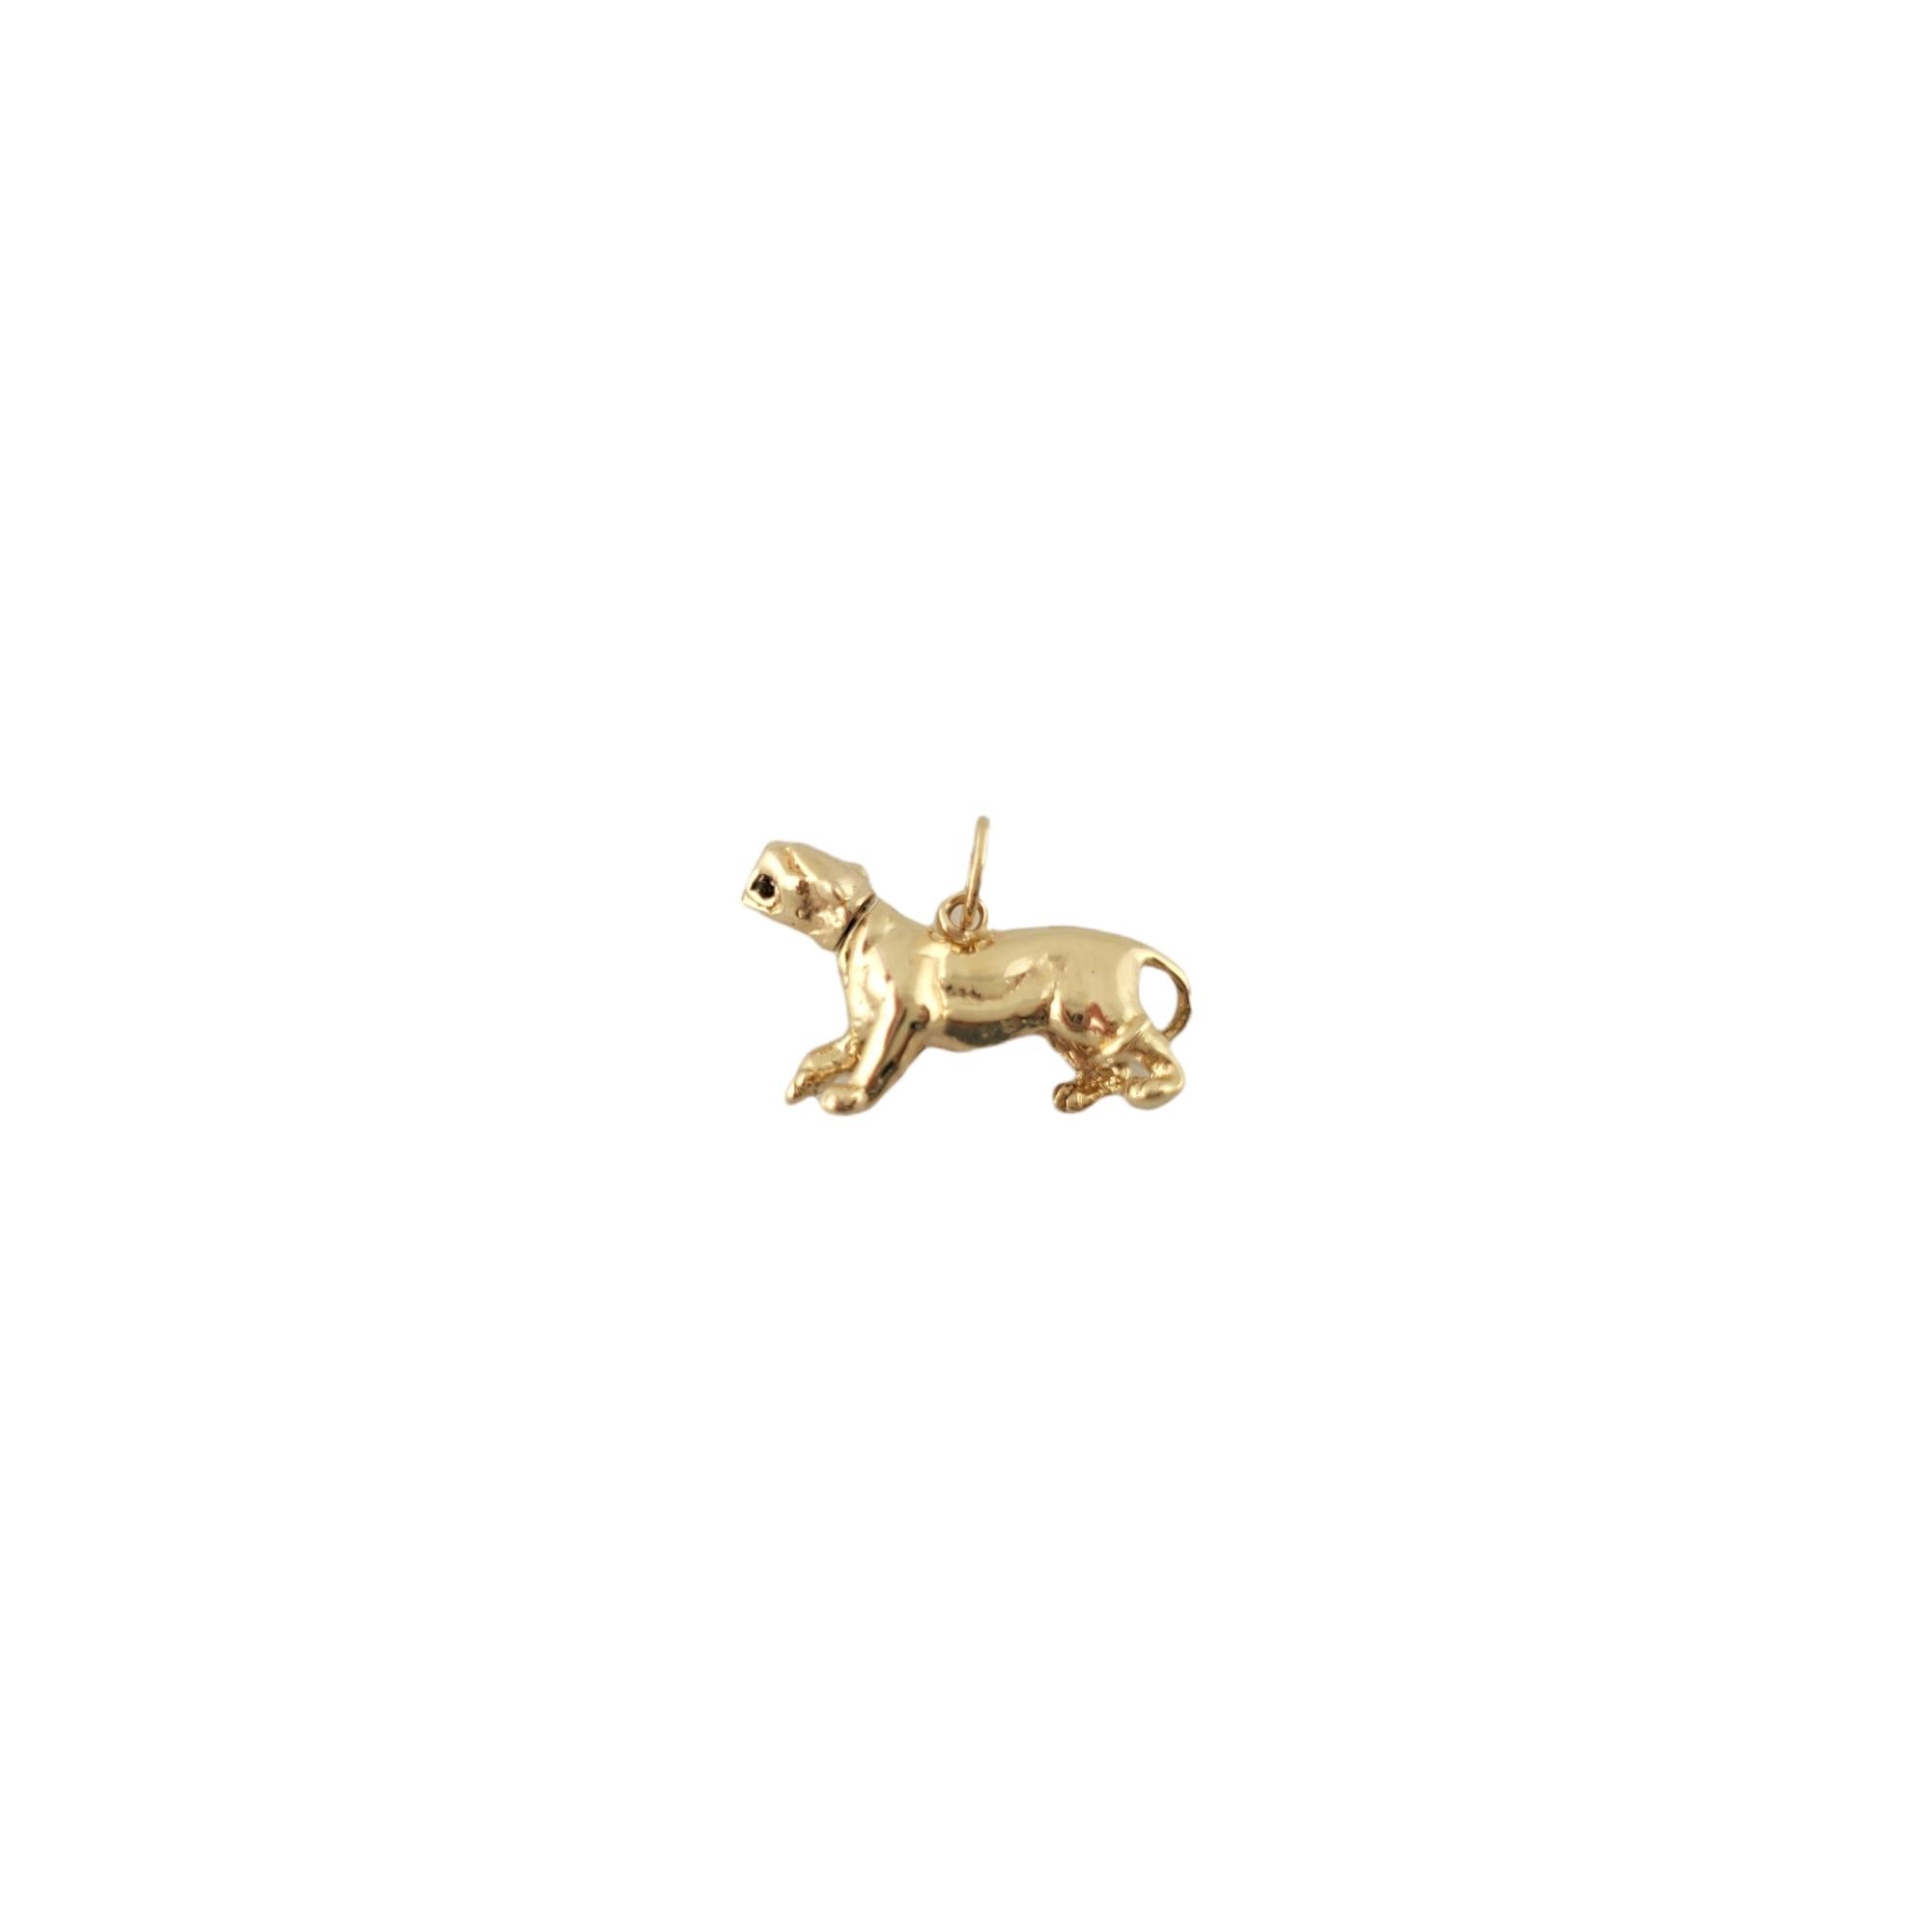 14K Yellow Gold Lioness Charm

This meticulously detailed piece features a lioness charm in 14K yellow gold with a moving head.

Size: 21.6 mm X 12 mm

Weight: 4.0 g/ 2.5 dwt

Hallmark: 14K 

Very good condition, professionally polished.

Will come